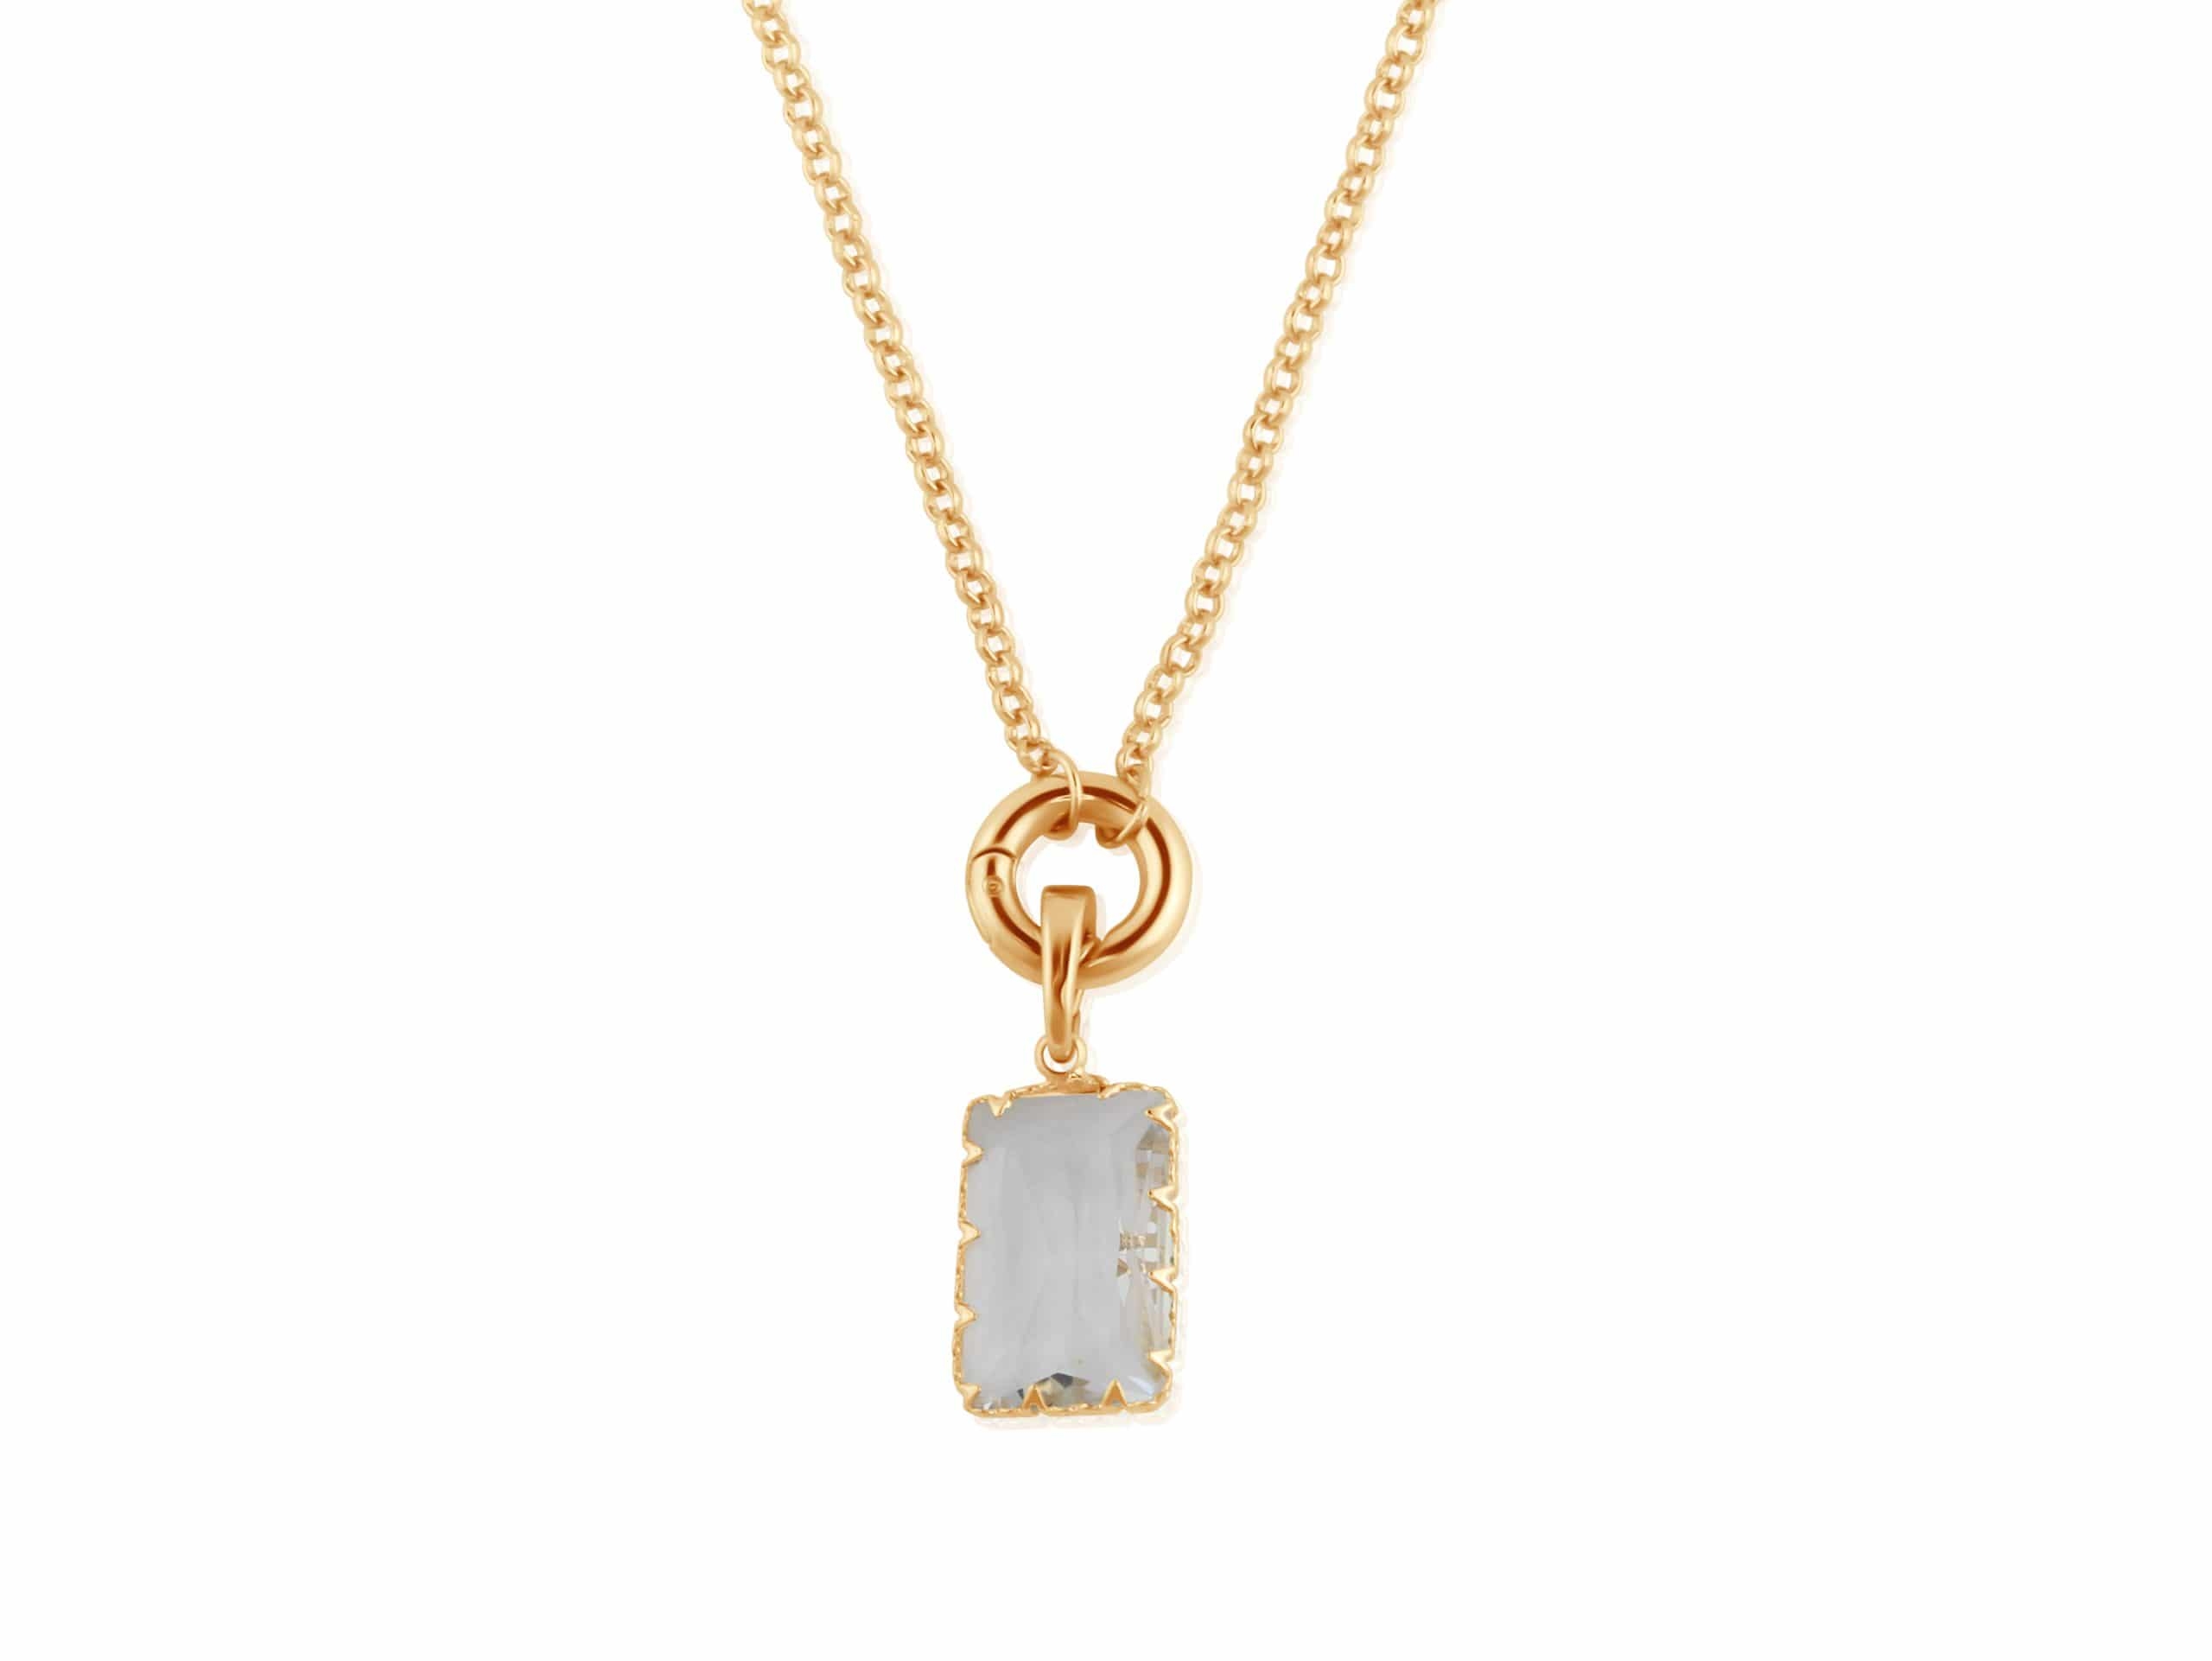 Cosette Mini Allure Baguette Plated Brass Belcher Chain Necklace in Gold and Crystal – Big Metal London